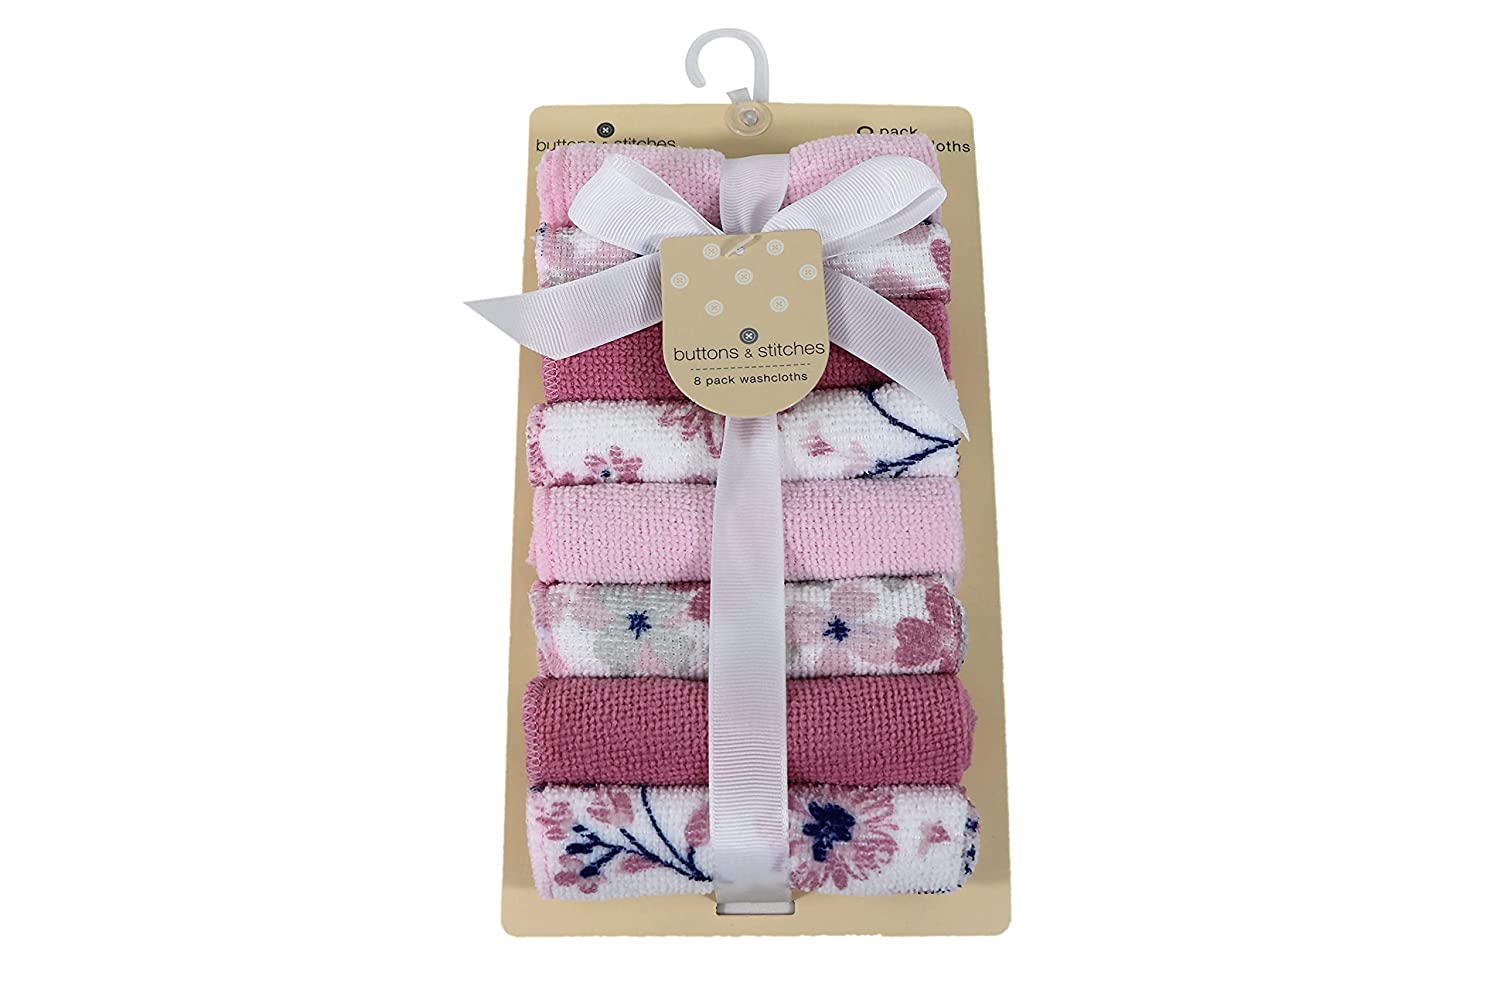 Buttons & Stitches 8pk Washcloth